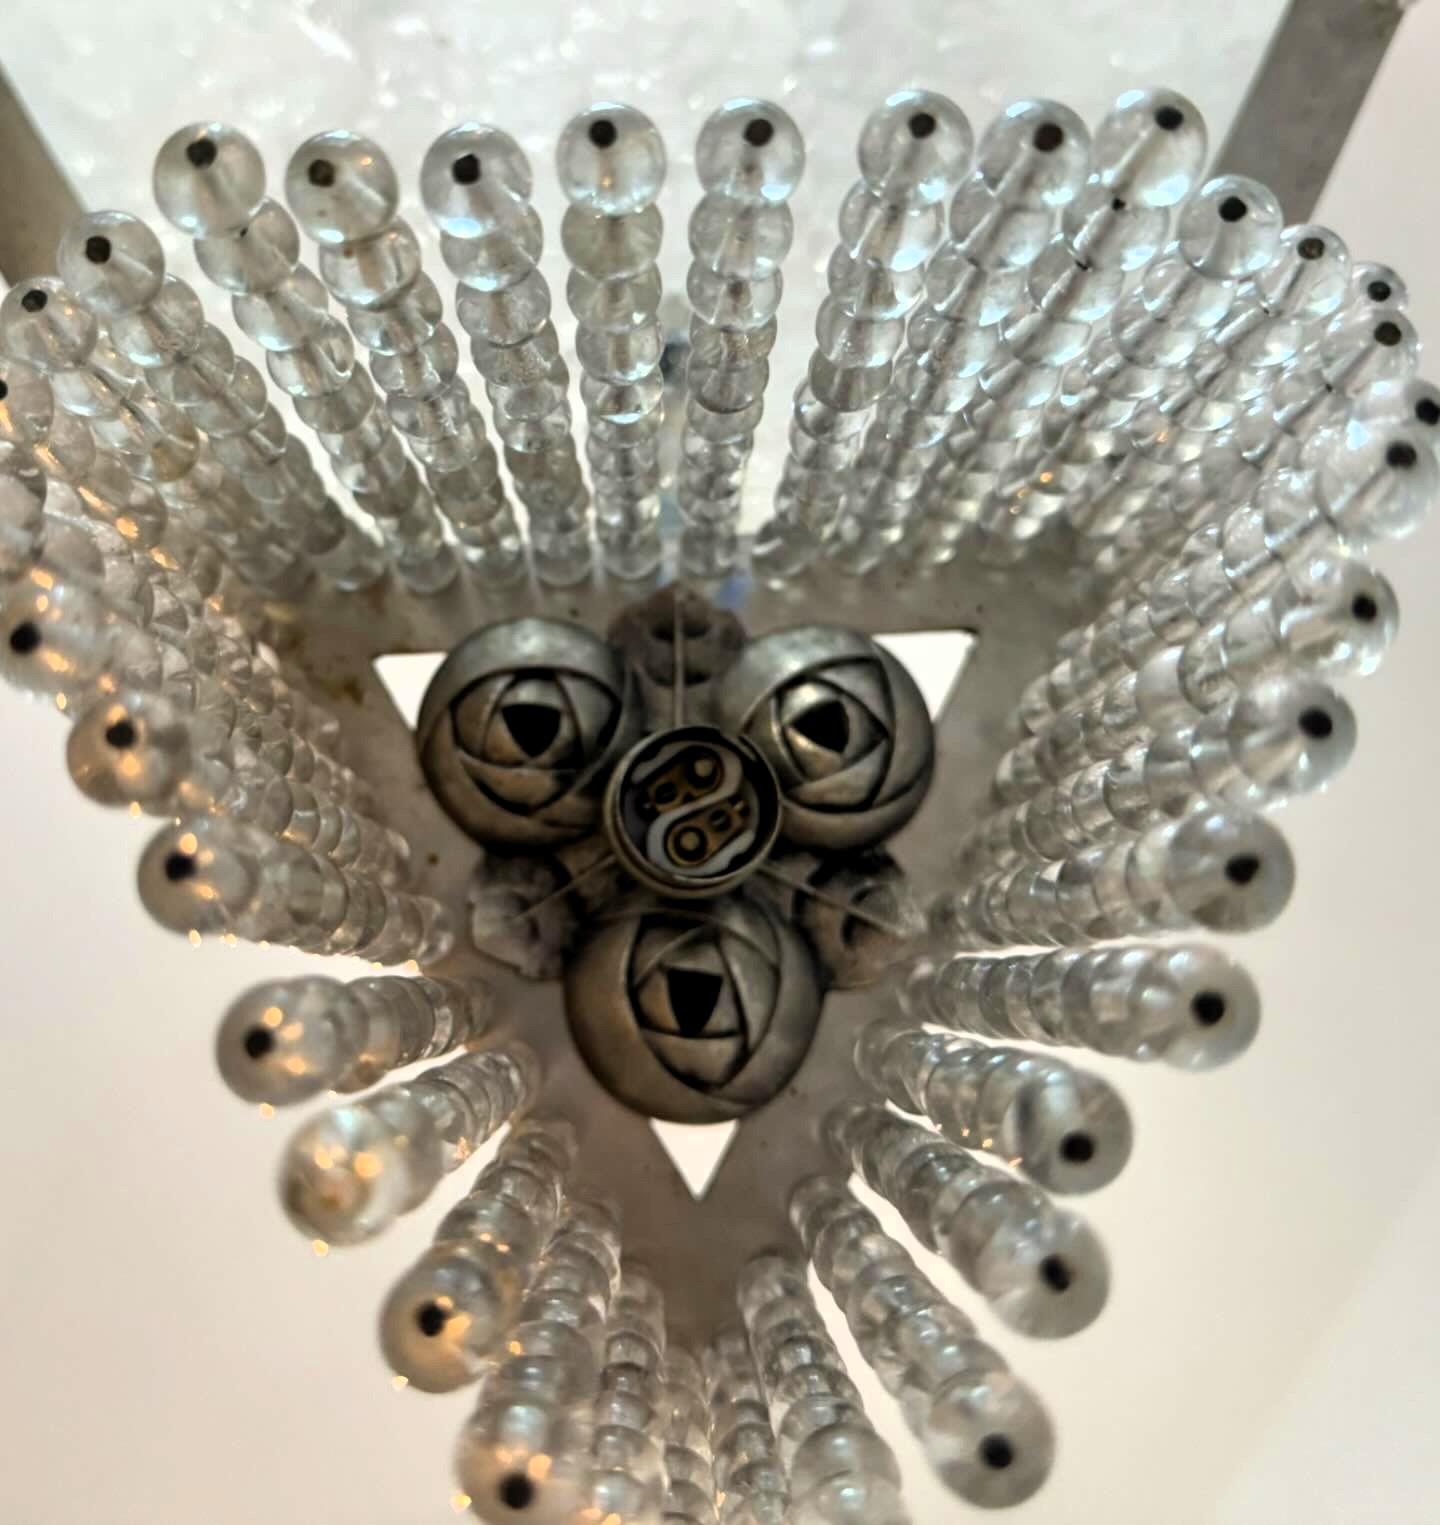 Beautiful and small 4 light chandelier, manufactured in France circa 1920 in nickel plated brass, pressed glass and crystal beads, showing stylized roses throughout its design.
The style of the crystal bead fringe is reminescent of the those